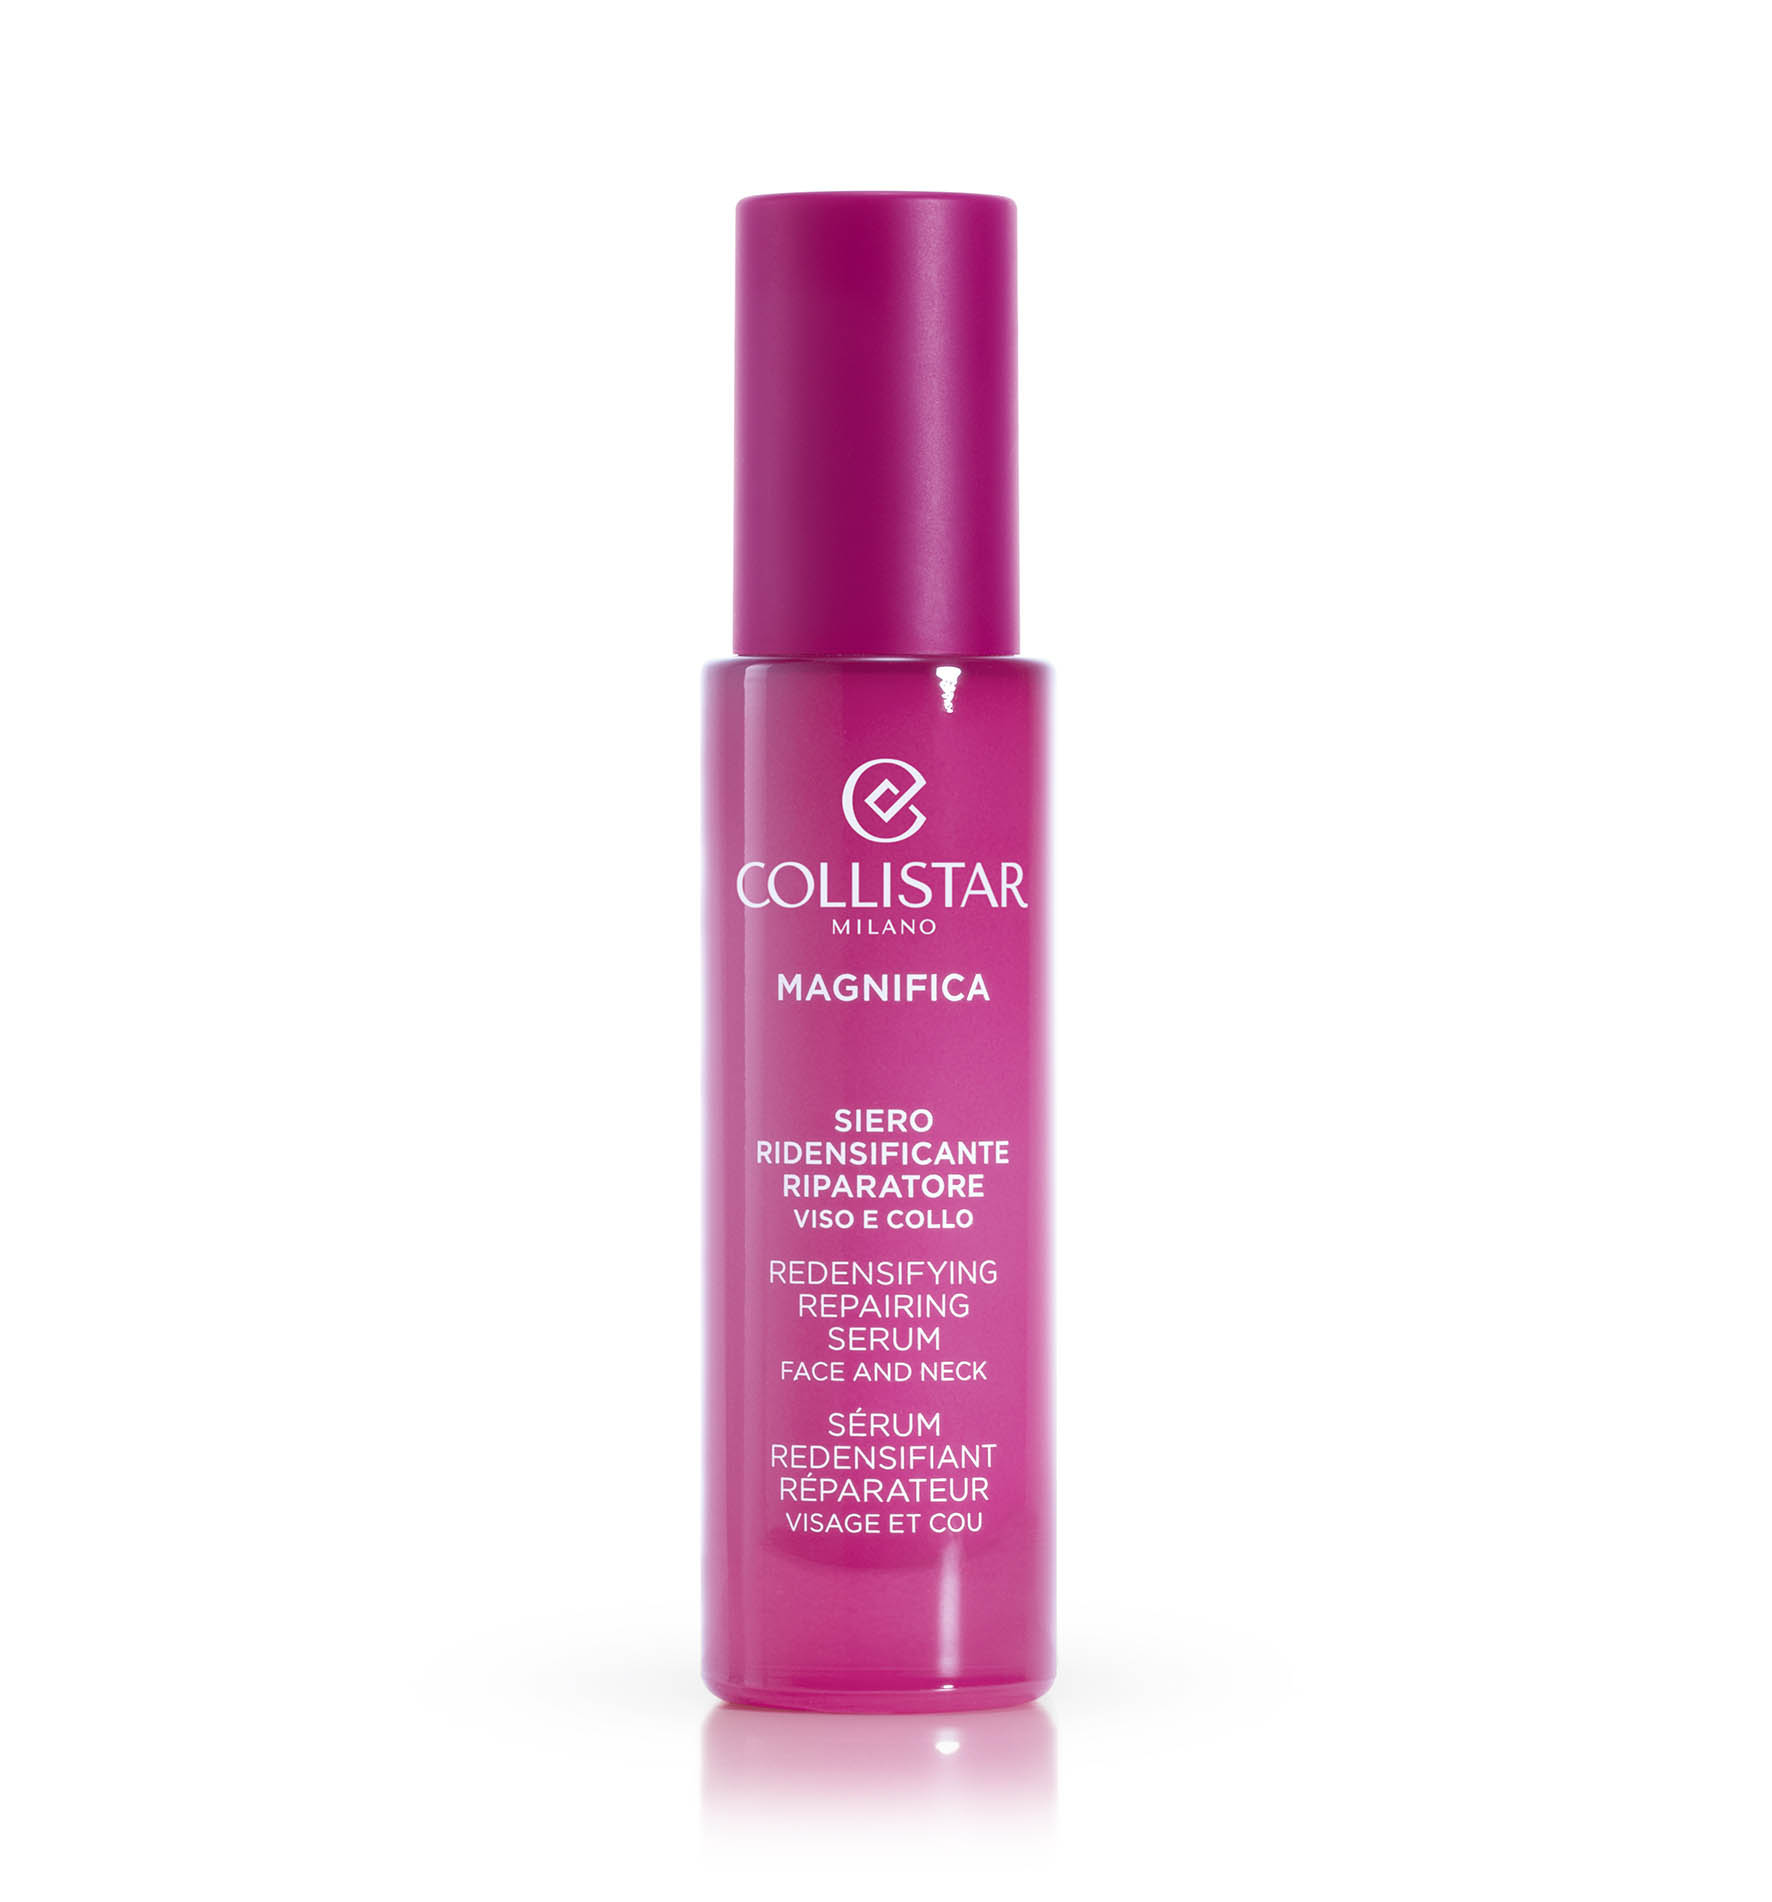 MAGNIFICA REDENSIFYING REPAIRING SERUM FACE AND NECK - Wrinkles | Collistar - Shop Online Ufficiale